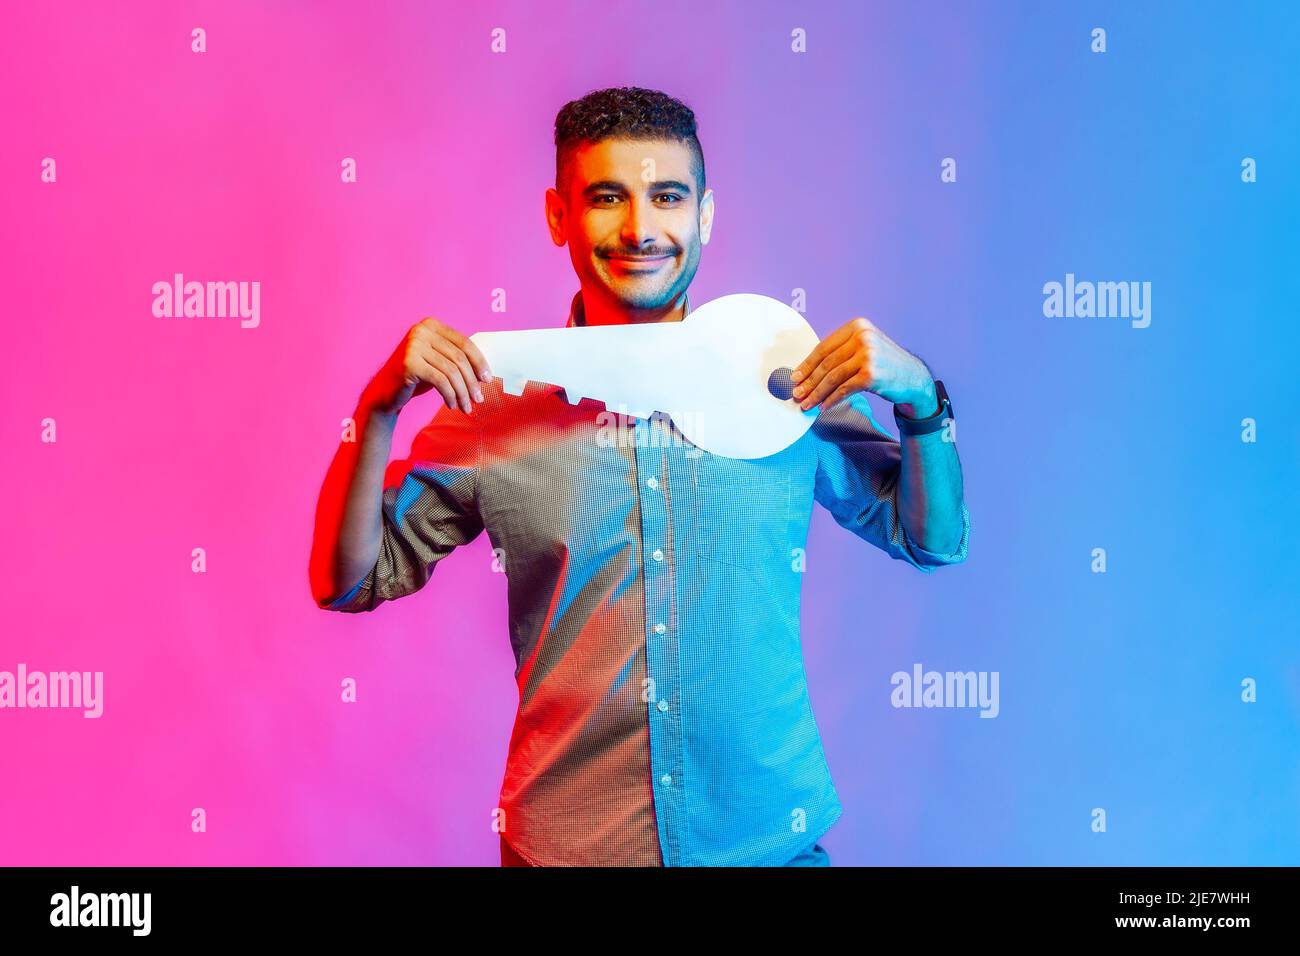 Portrait of positive man in shirt holding huge paper key and smiling satisfied with new home, real estate purchase, rental service. Indoor studio shot isolated on colorful neon light background. Stock Photo